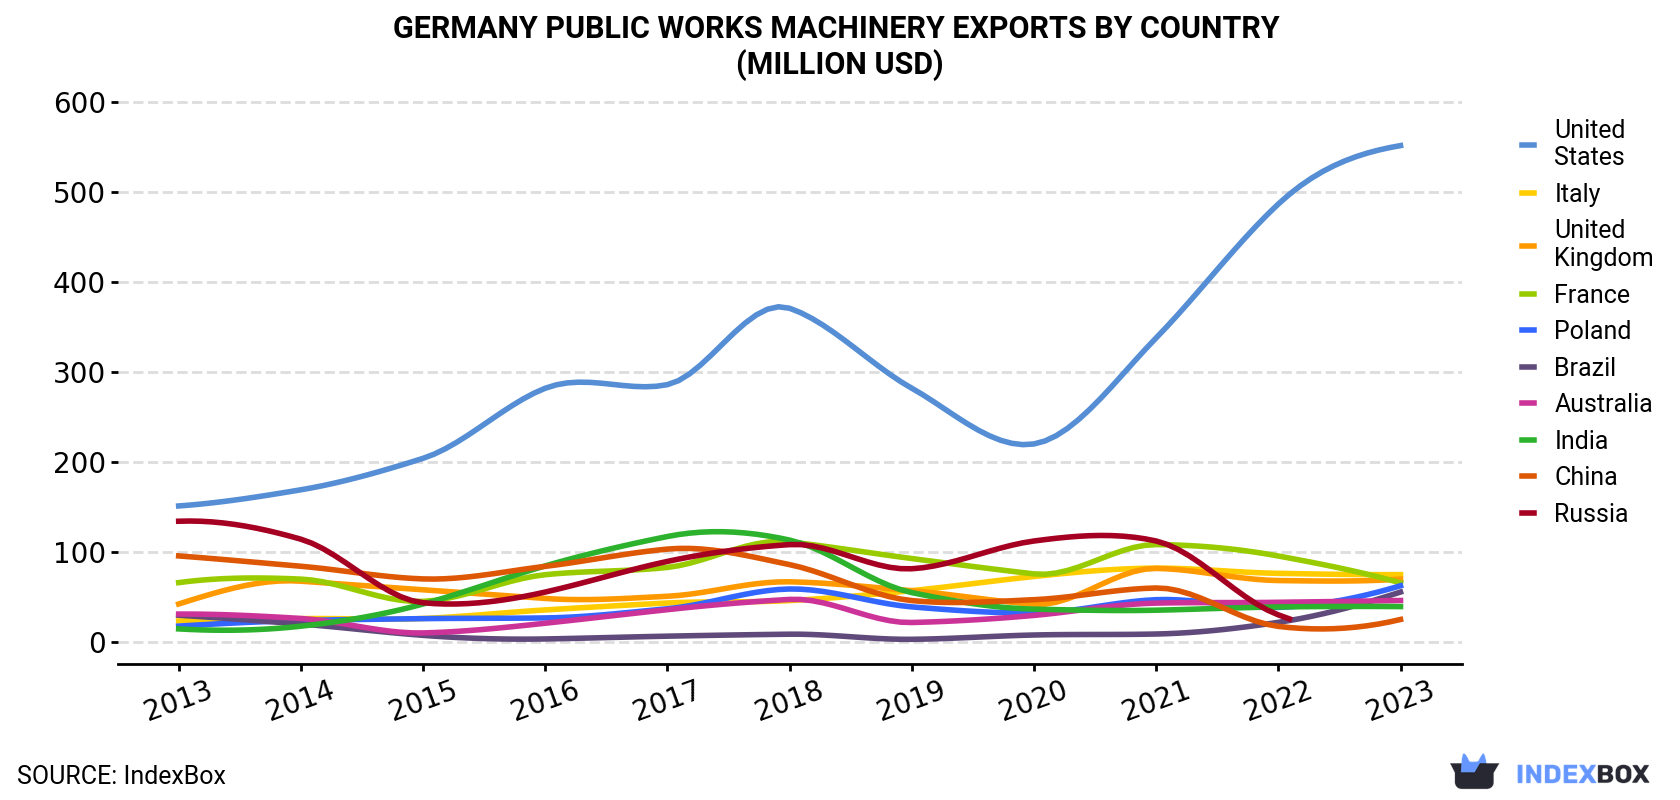 Germany Public Works Machinery Exports By Country (Million USD)